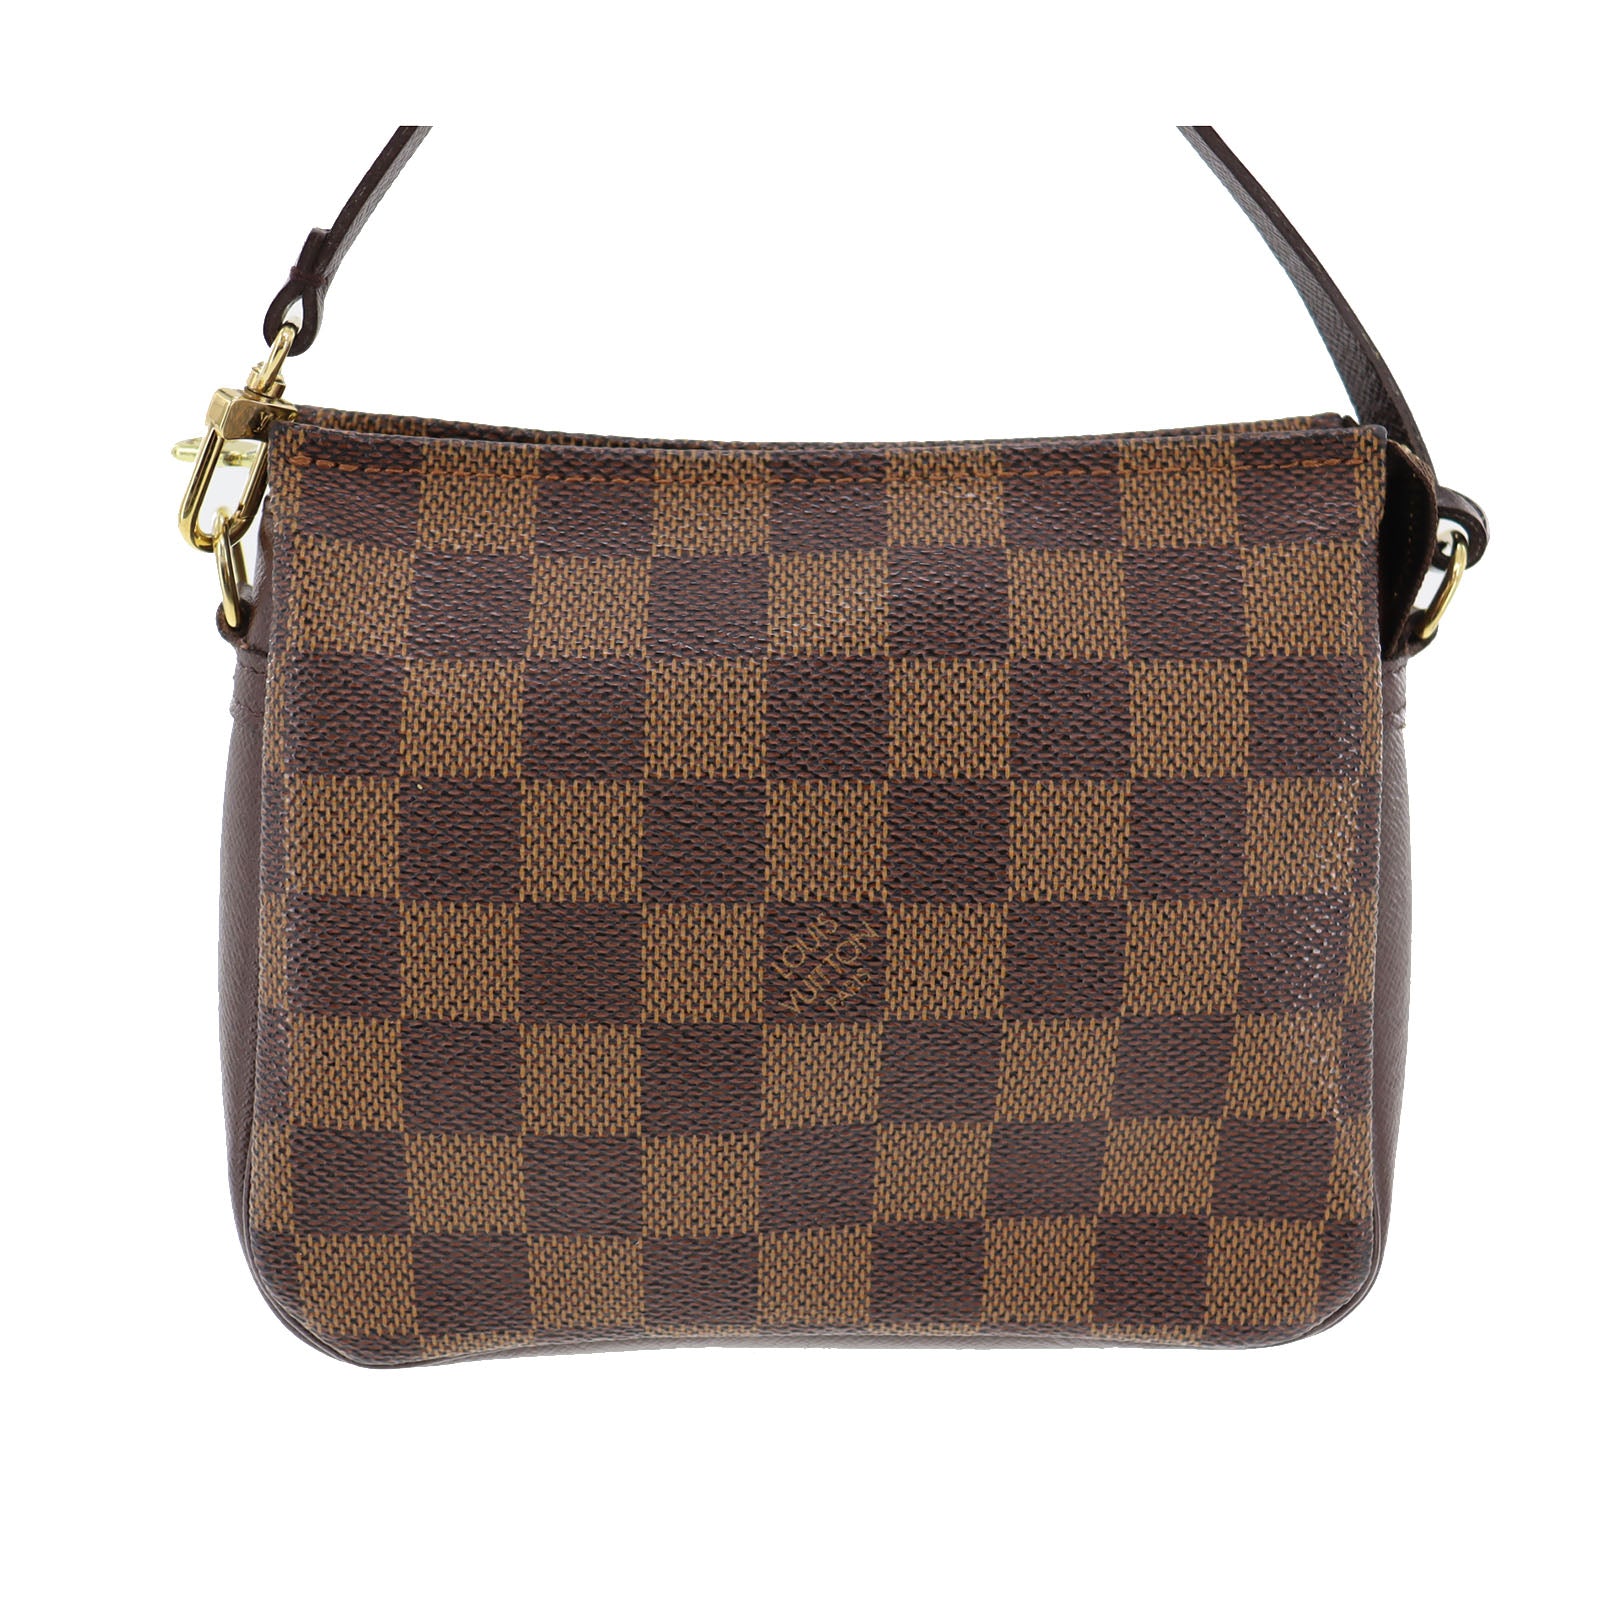 used vintage louis vuitton bags for women